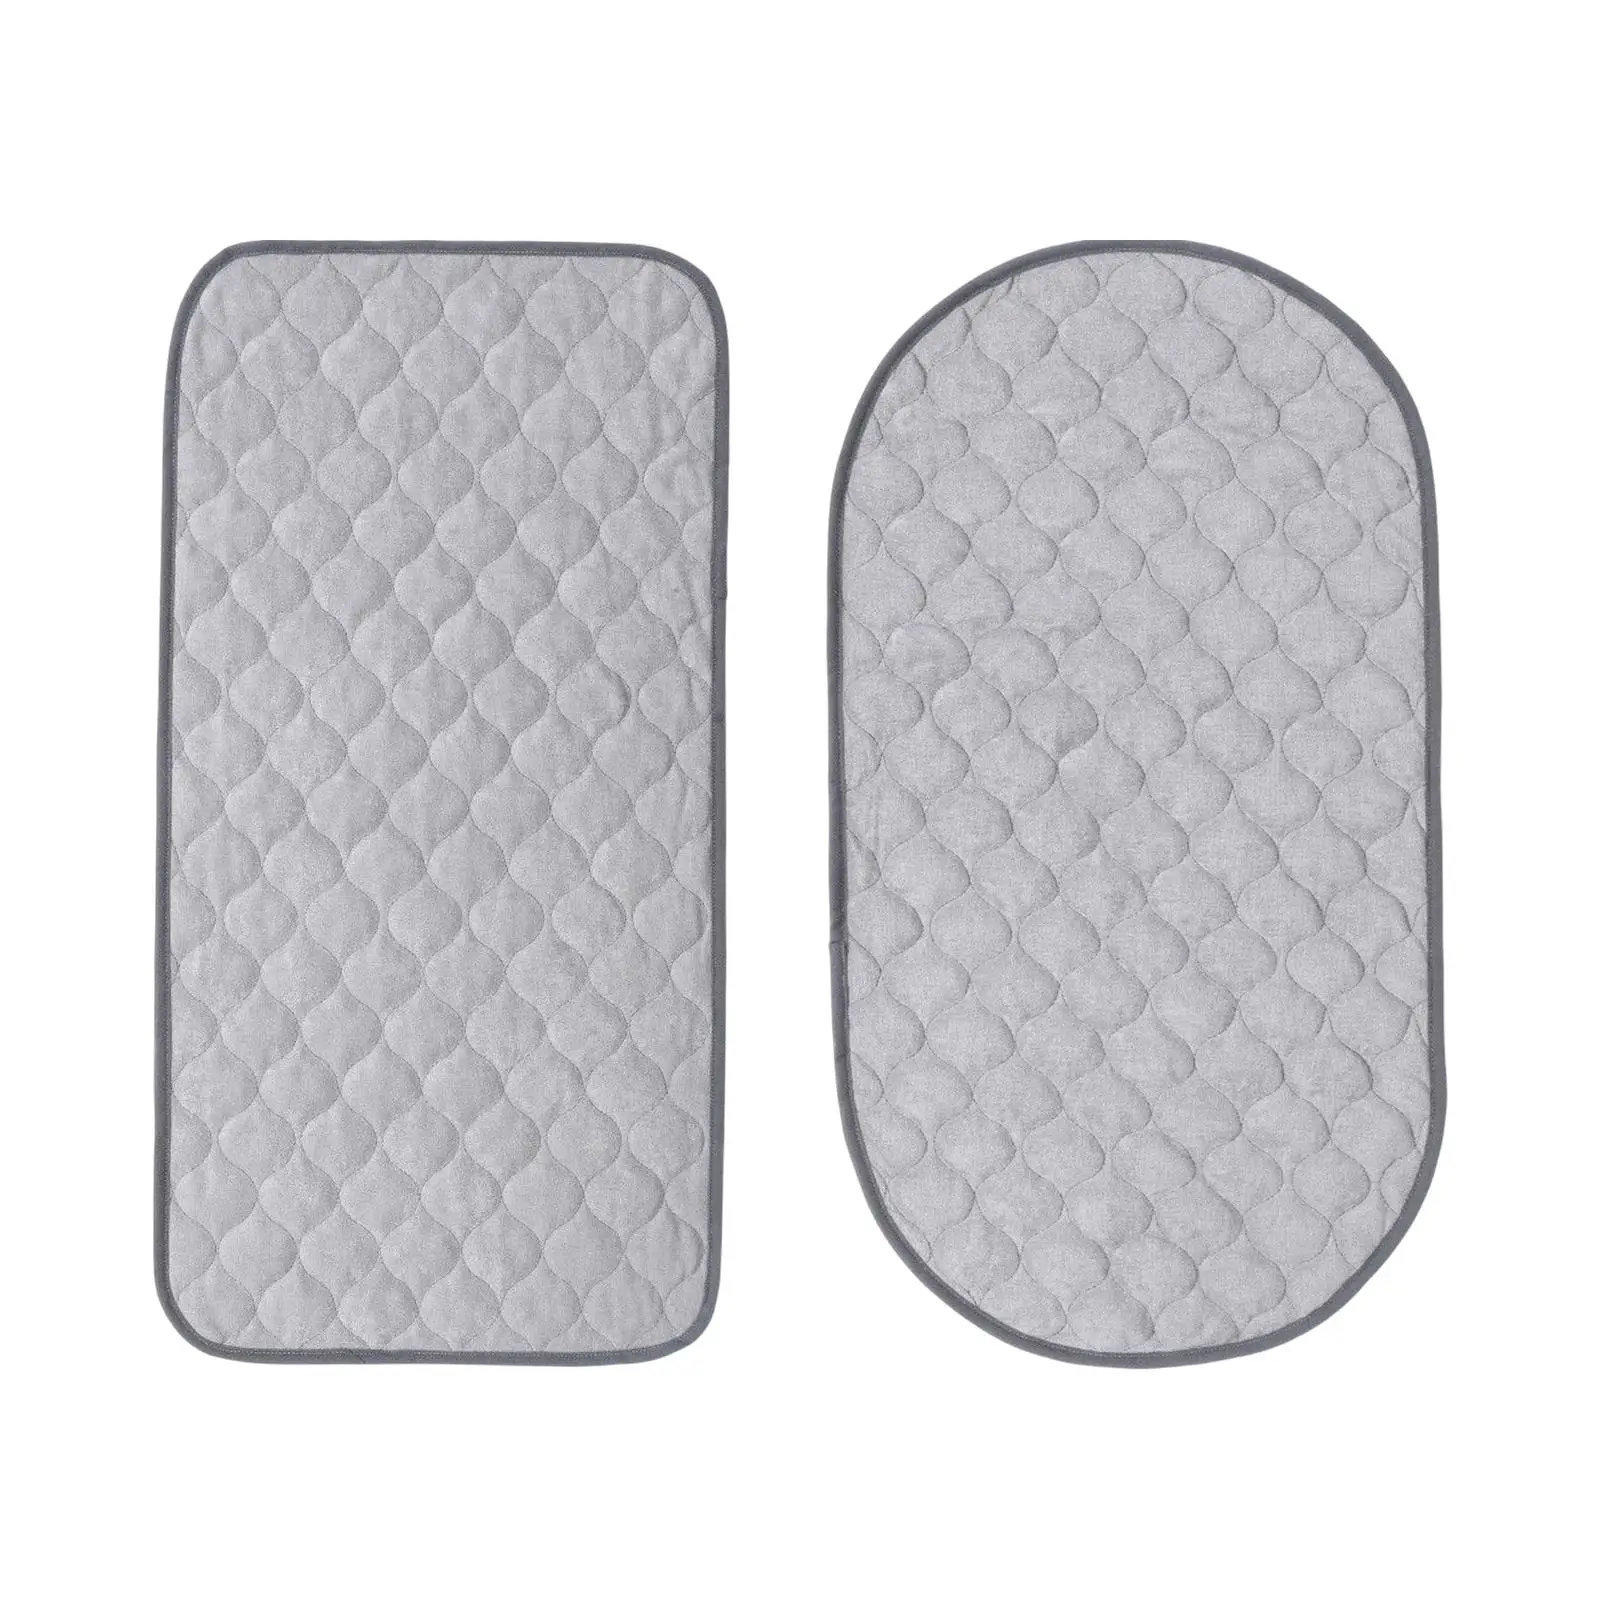 Bedding Changing Cover Sheet Protector Baby Infant Diaper Nappy Urine Mat Infant Urinal Pad for Baby Travel Home Outside